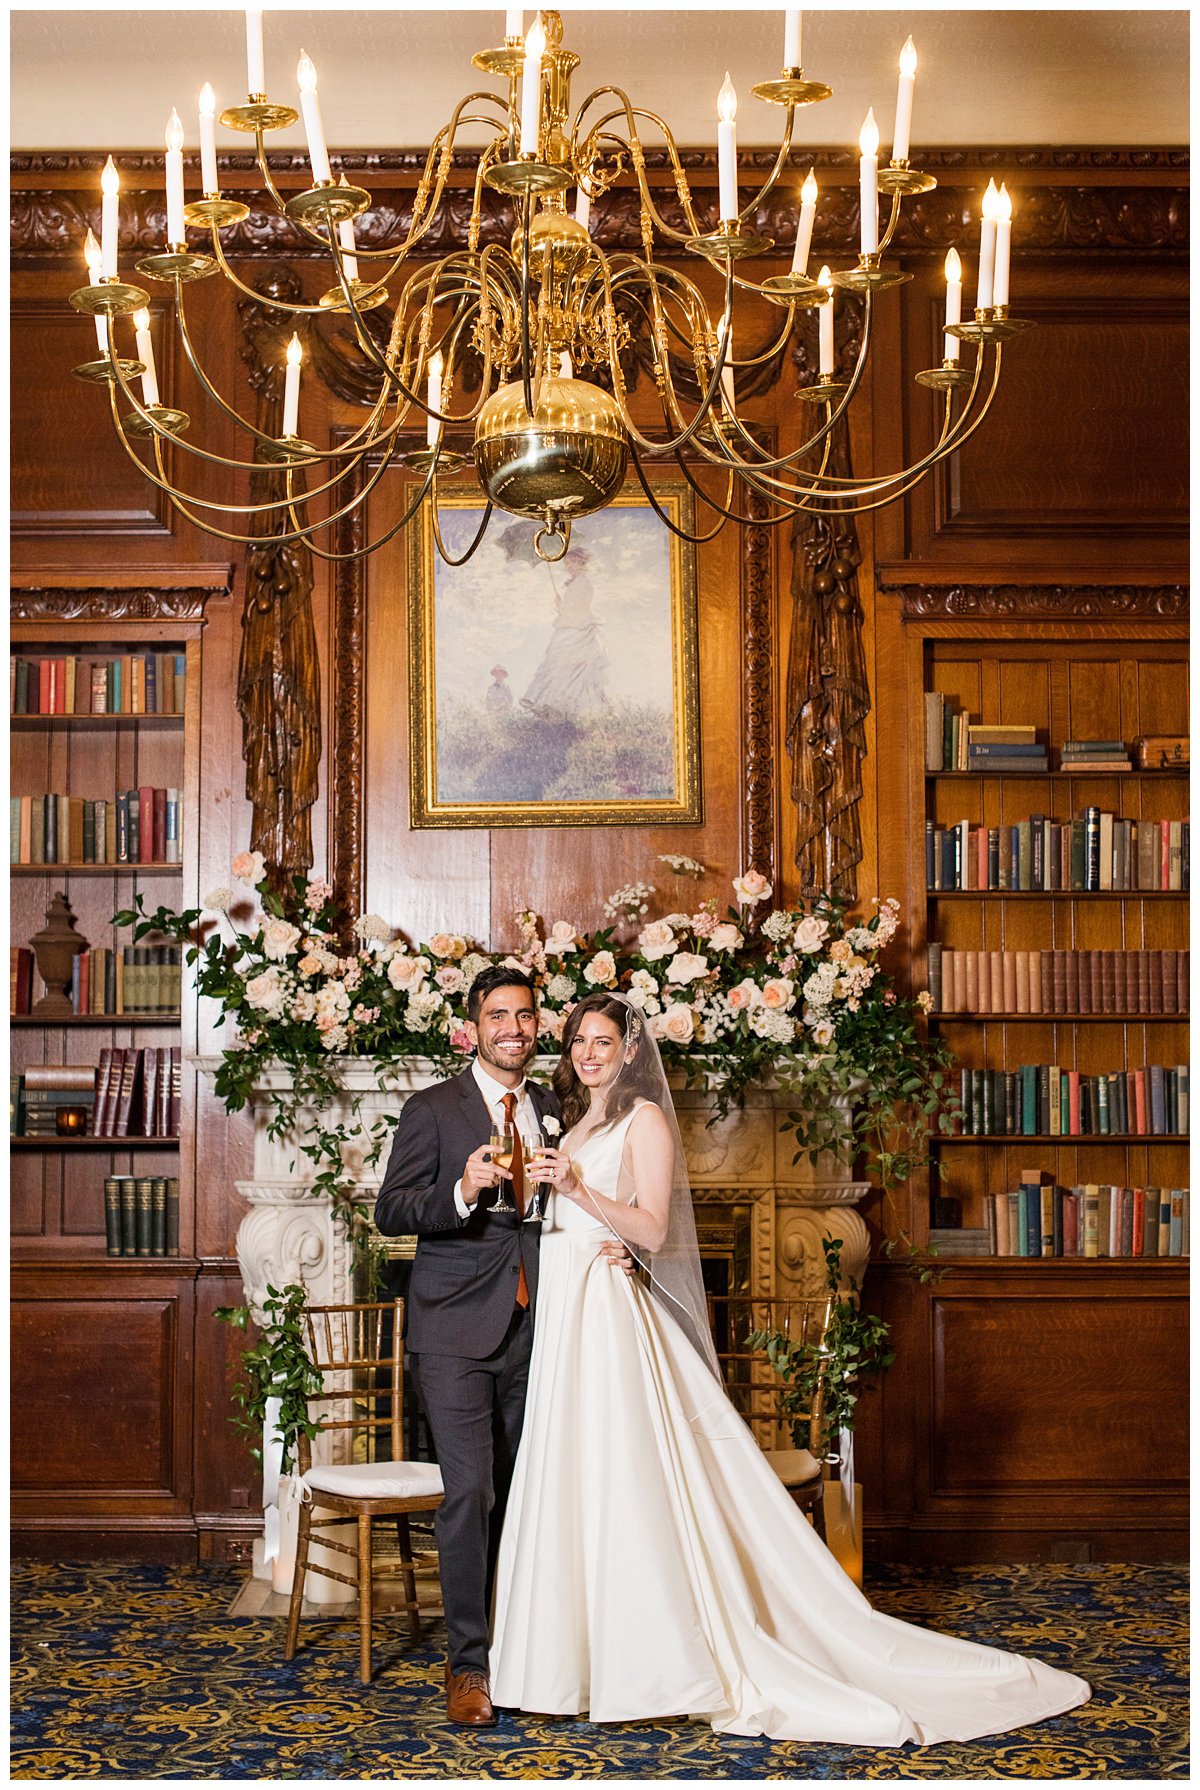 newlyweds toasting in front of fireplace with florals Boston wedding photographer